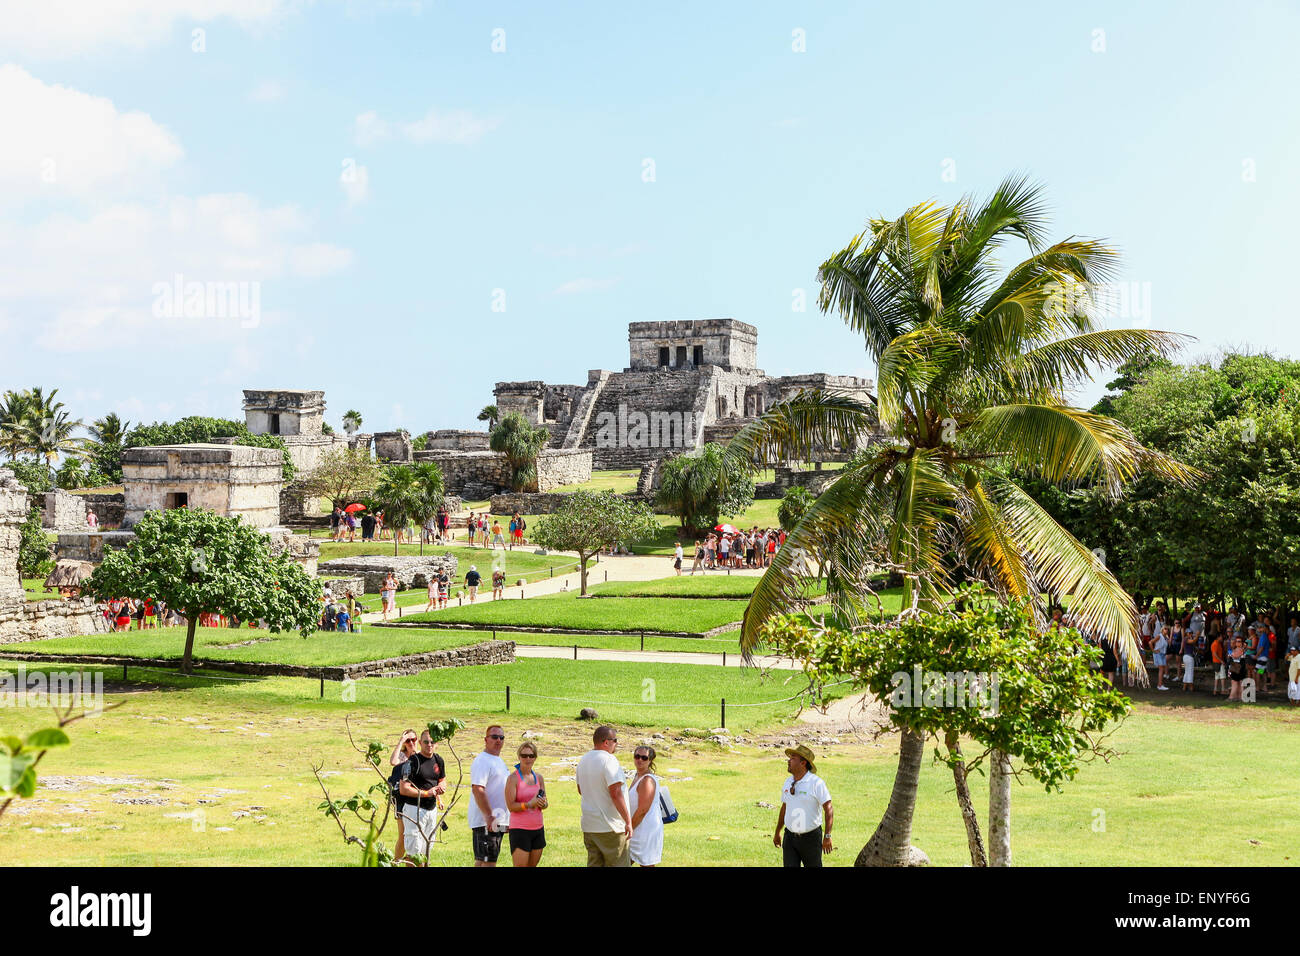 Tulum ruins the site of a Mayan ancient civilization walled city on the Yucatán Peninsula, Quintana Roo, Mexico Stock Photo